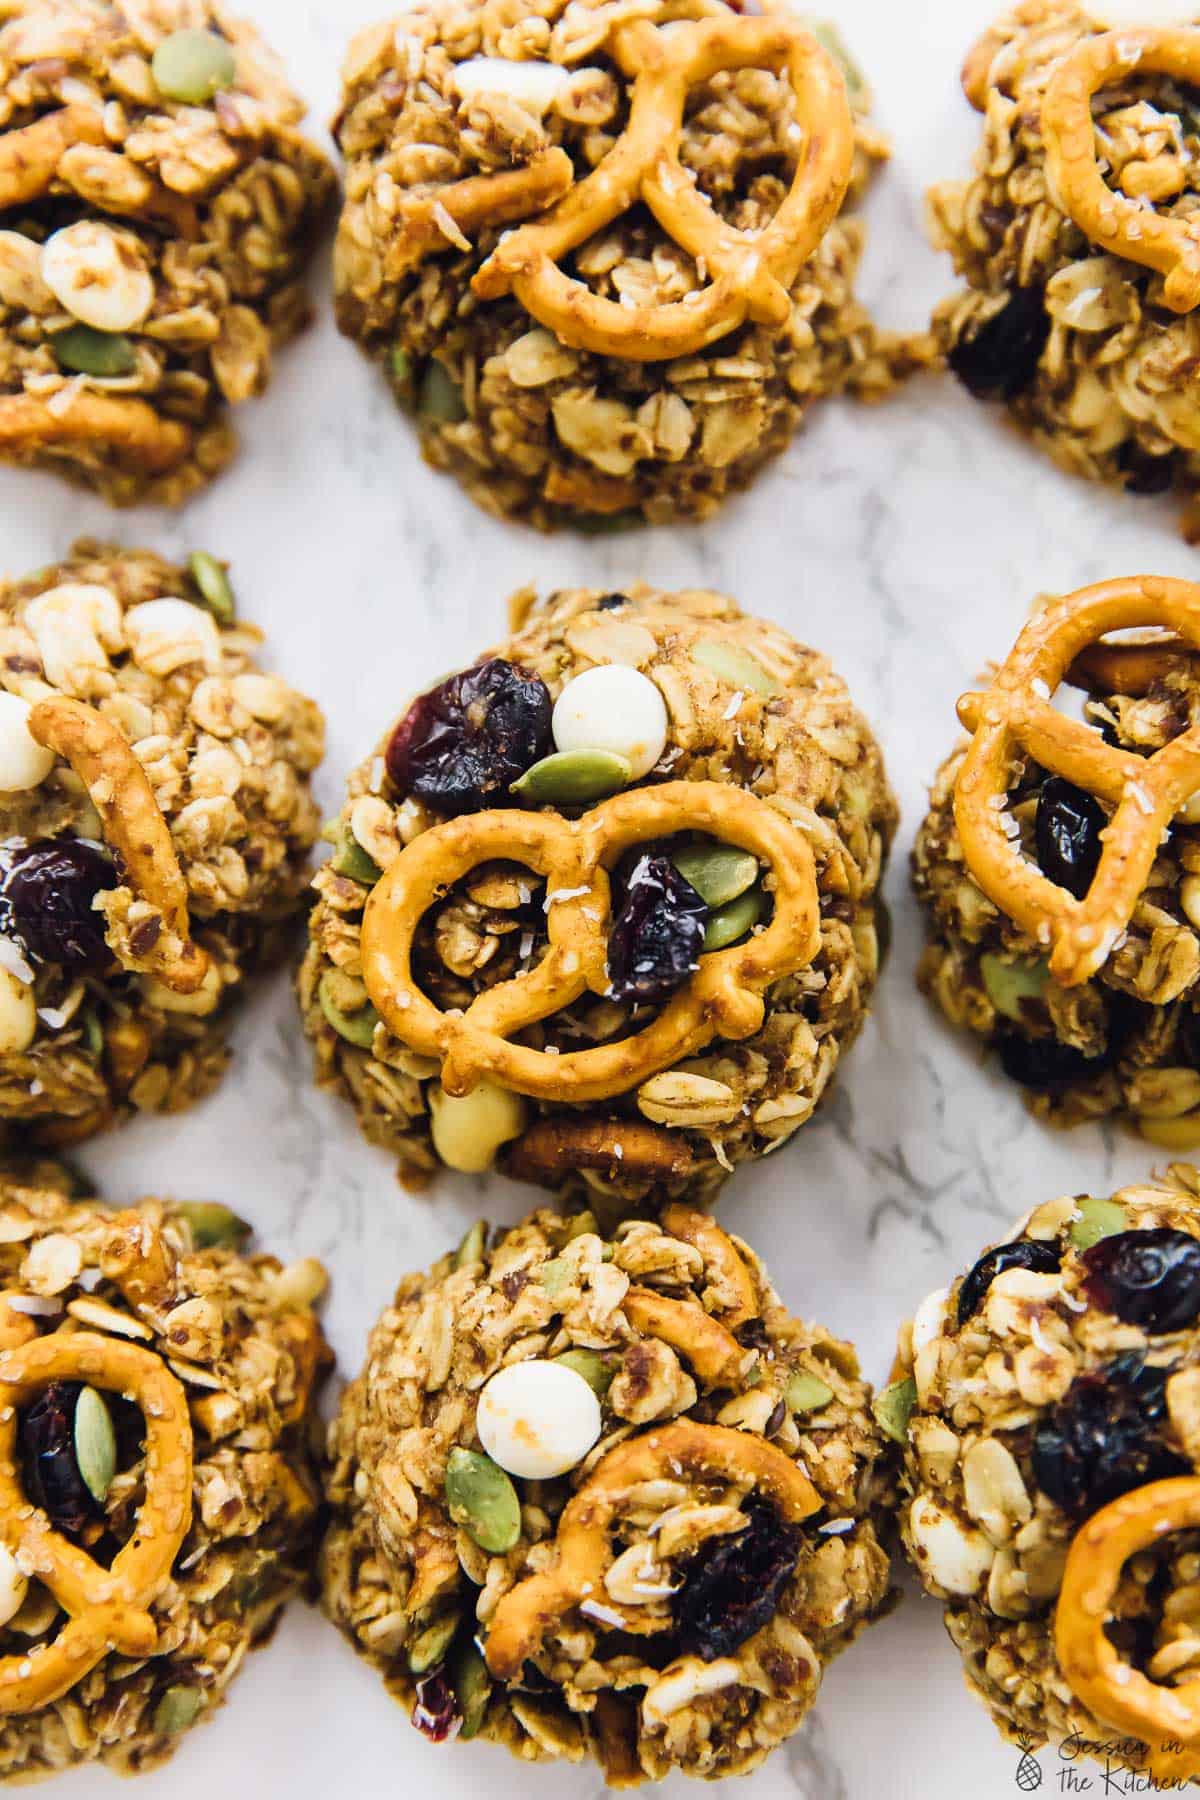 Overhead view of peanut butter banana oatmeal cookies with pretzels